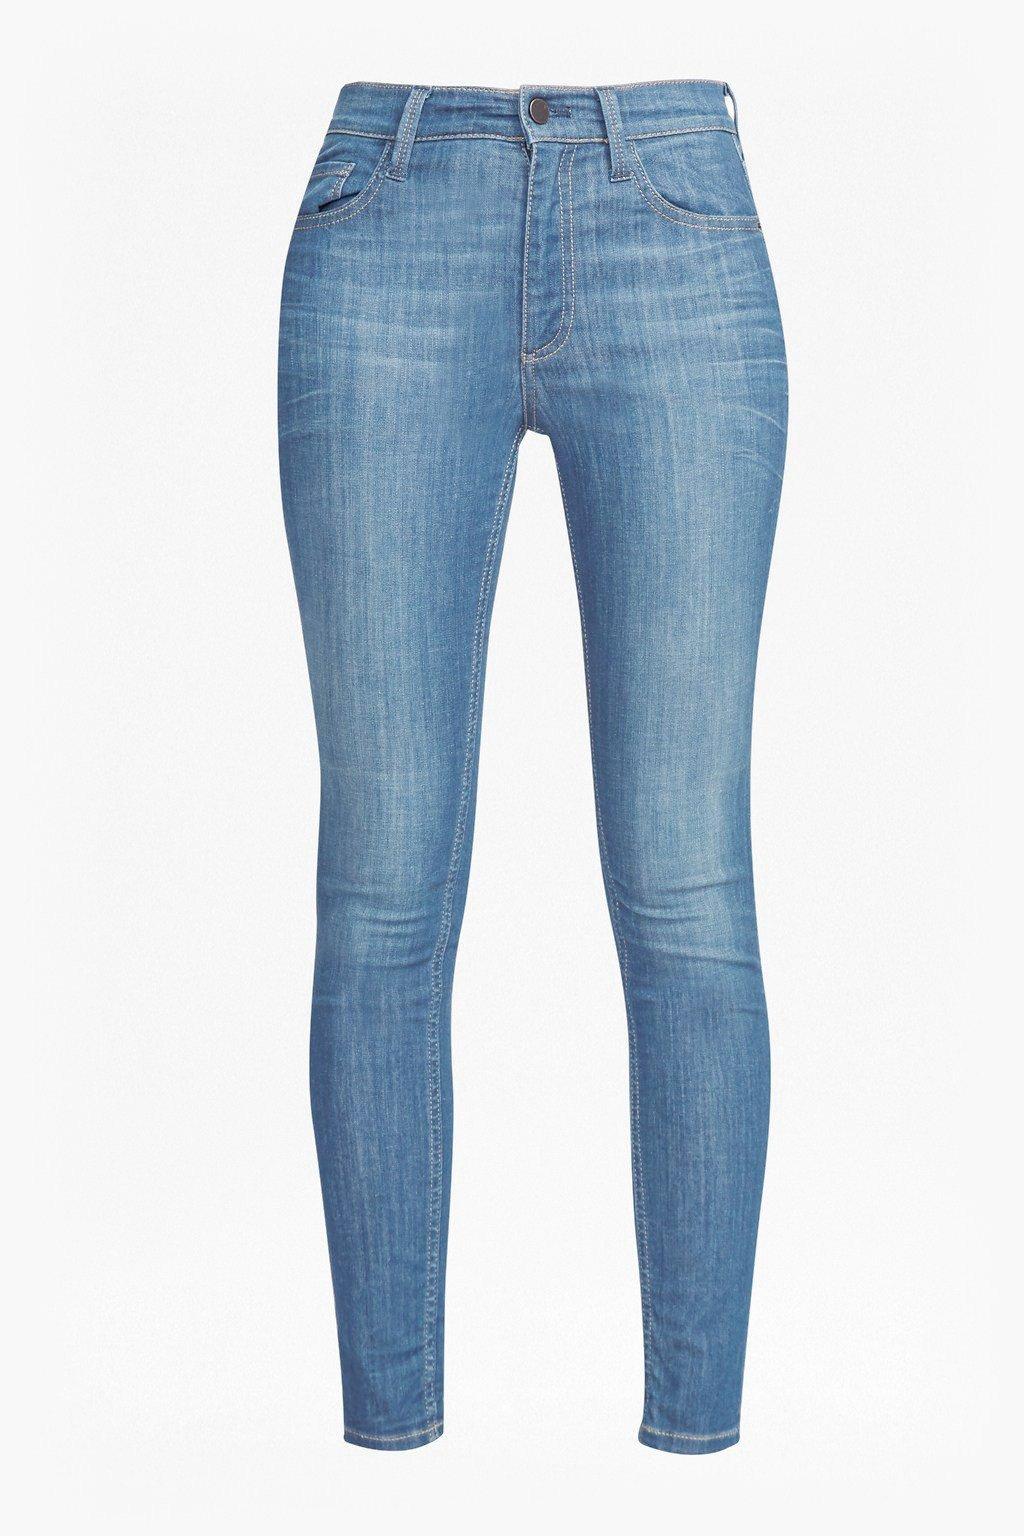 French Connection Denim Rebound Skinny Jeans in Blue | Lyst